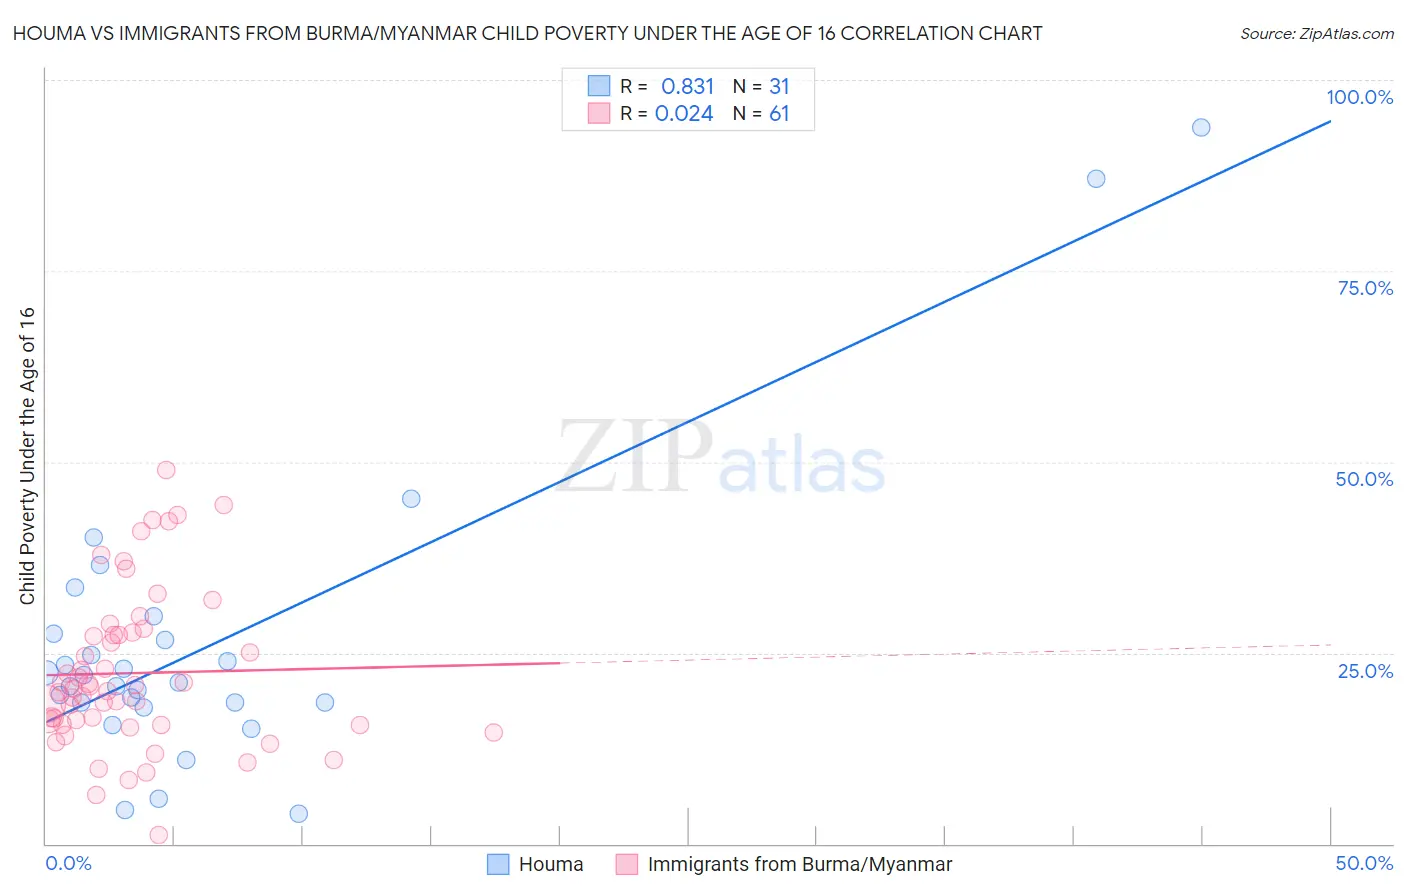 Houma vs Immigrants from Burma/Myanmar Child Poverty Under the Age of 16